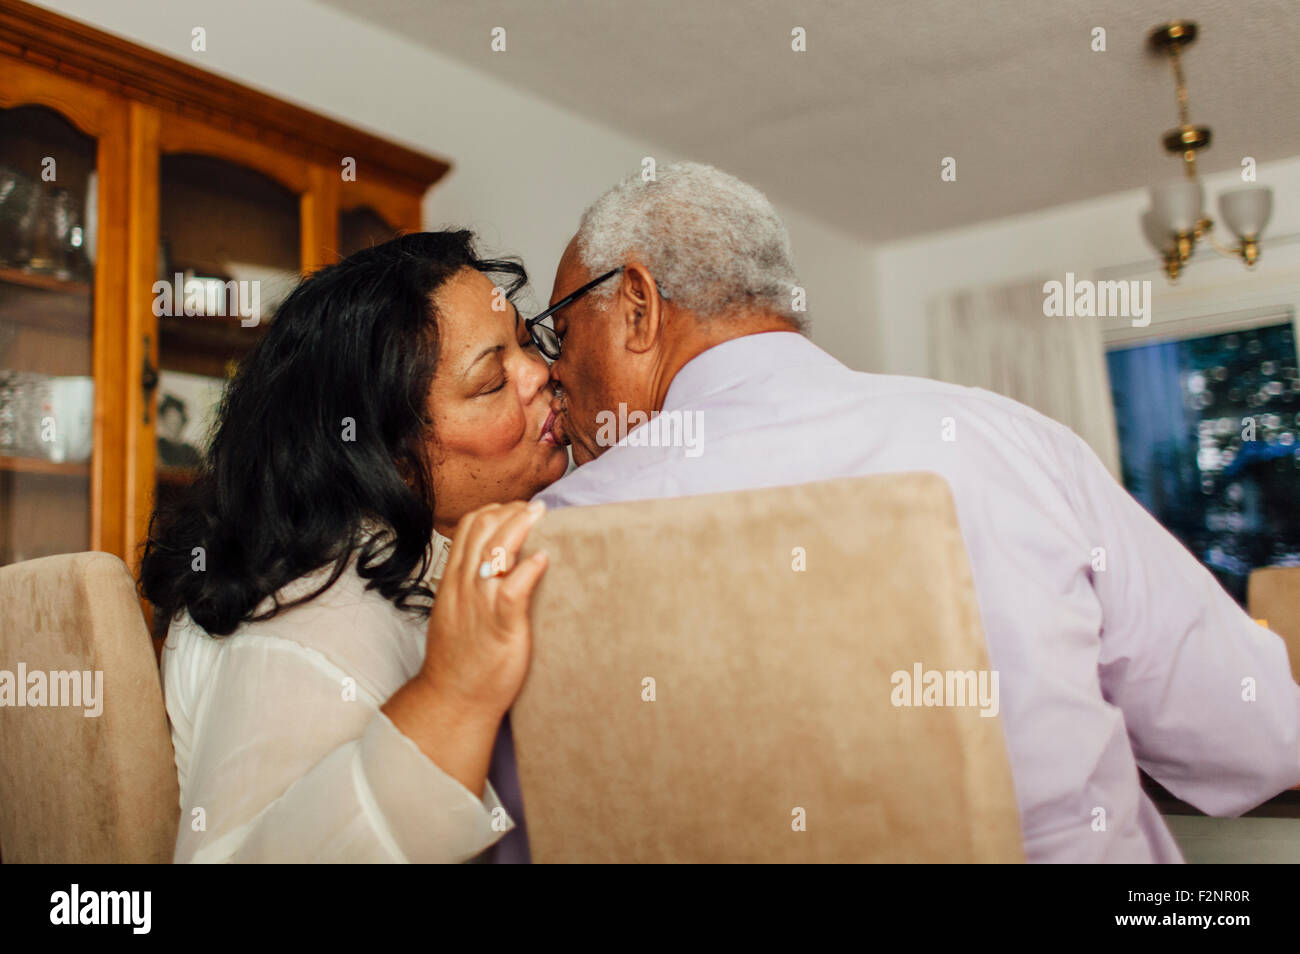 Close up of kissing couple in dining room Stock Photo